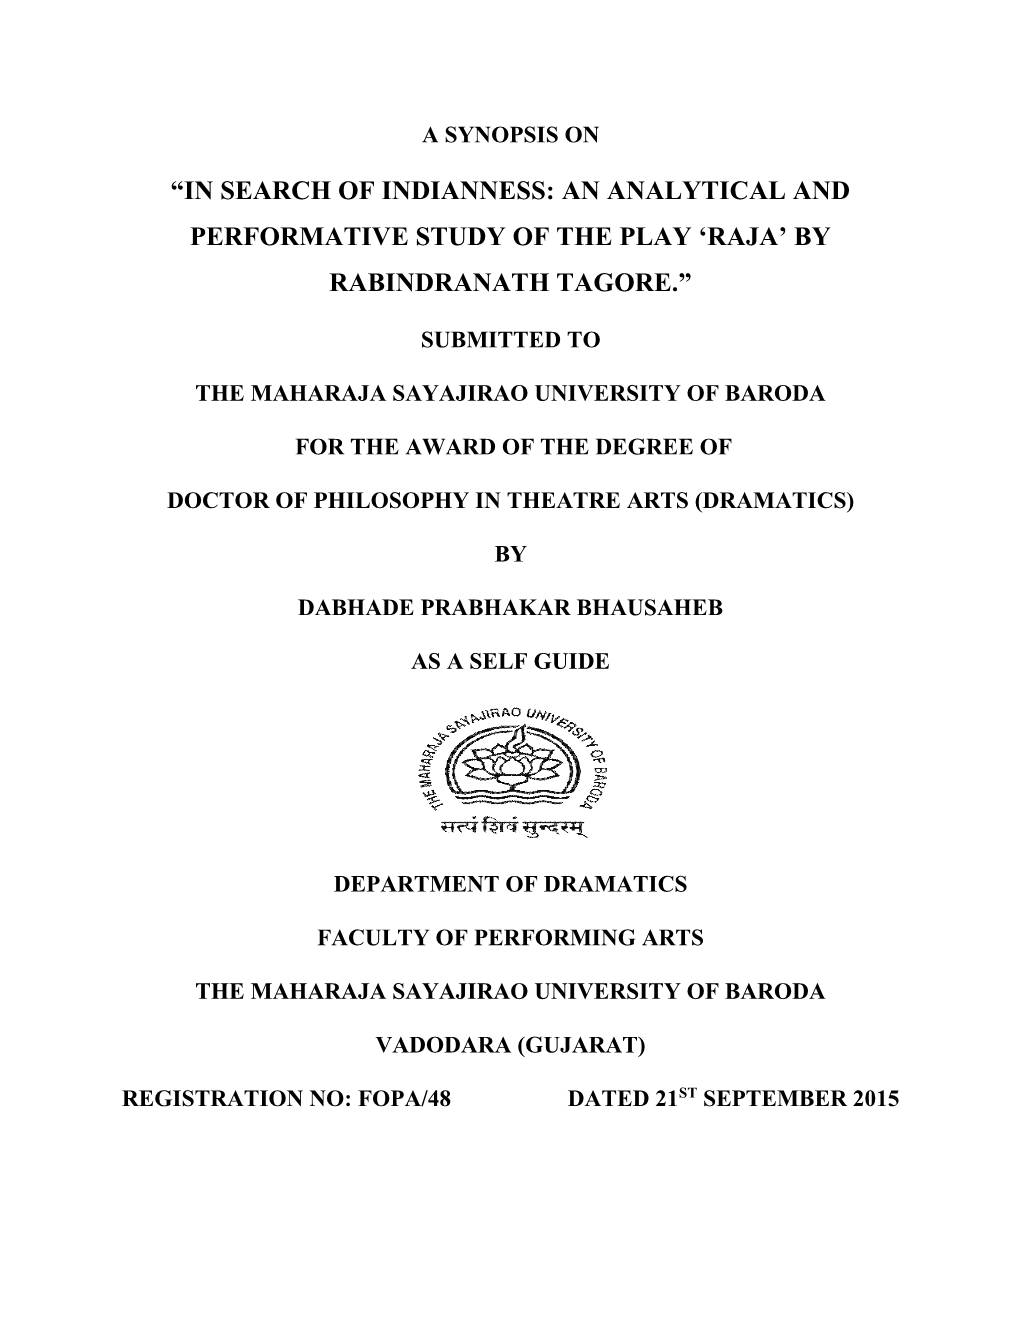 In Search of Indianness: an Analytical and Performative Study of the Play ‘Raja’ by Rabindranath Tagore.”